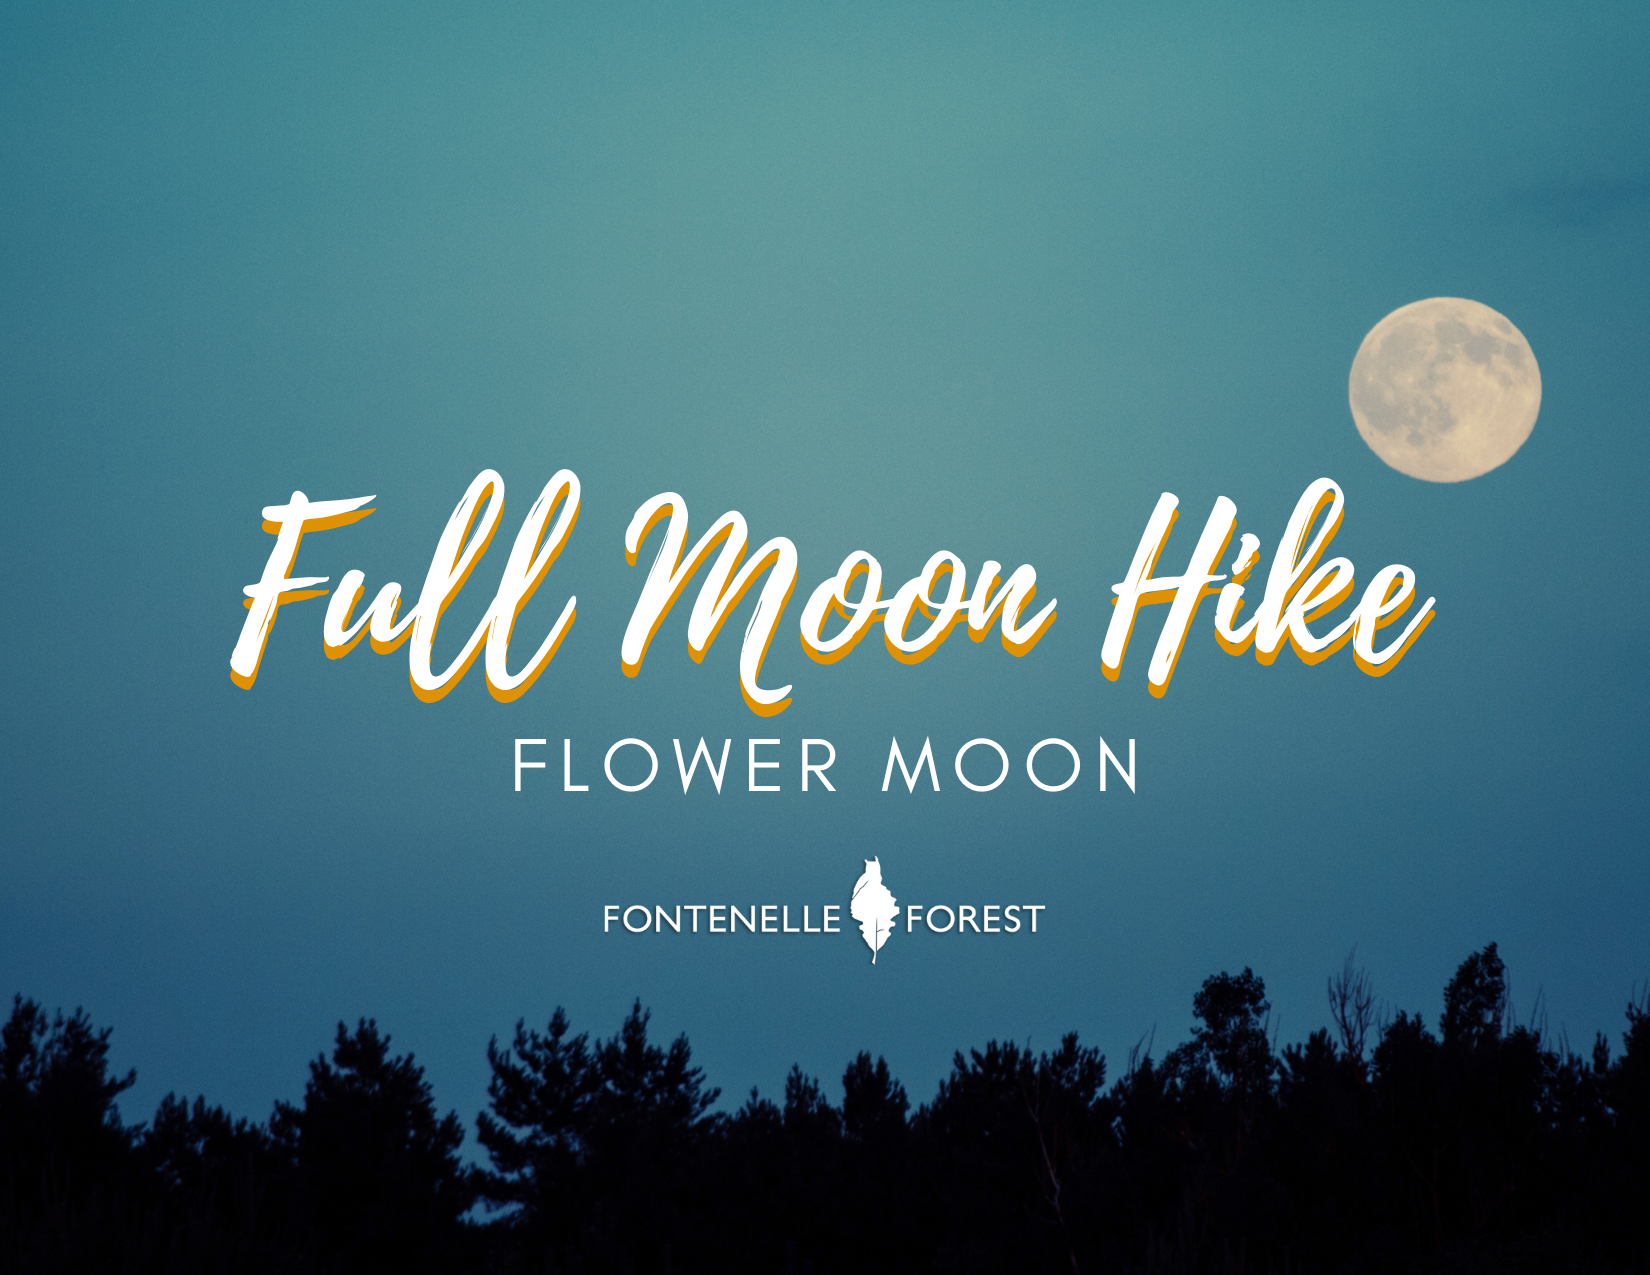 Pictures a dark blue sky at night with silhouettes of trees and a full moon. The text in cream is "Full Moon Hike" then on the next line "FLOWER MOON", with the Fontenelle Forest logo in white underneath.